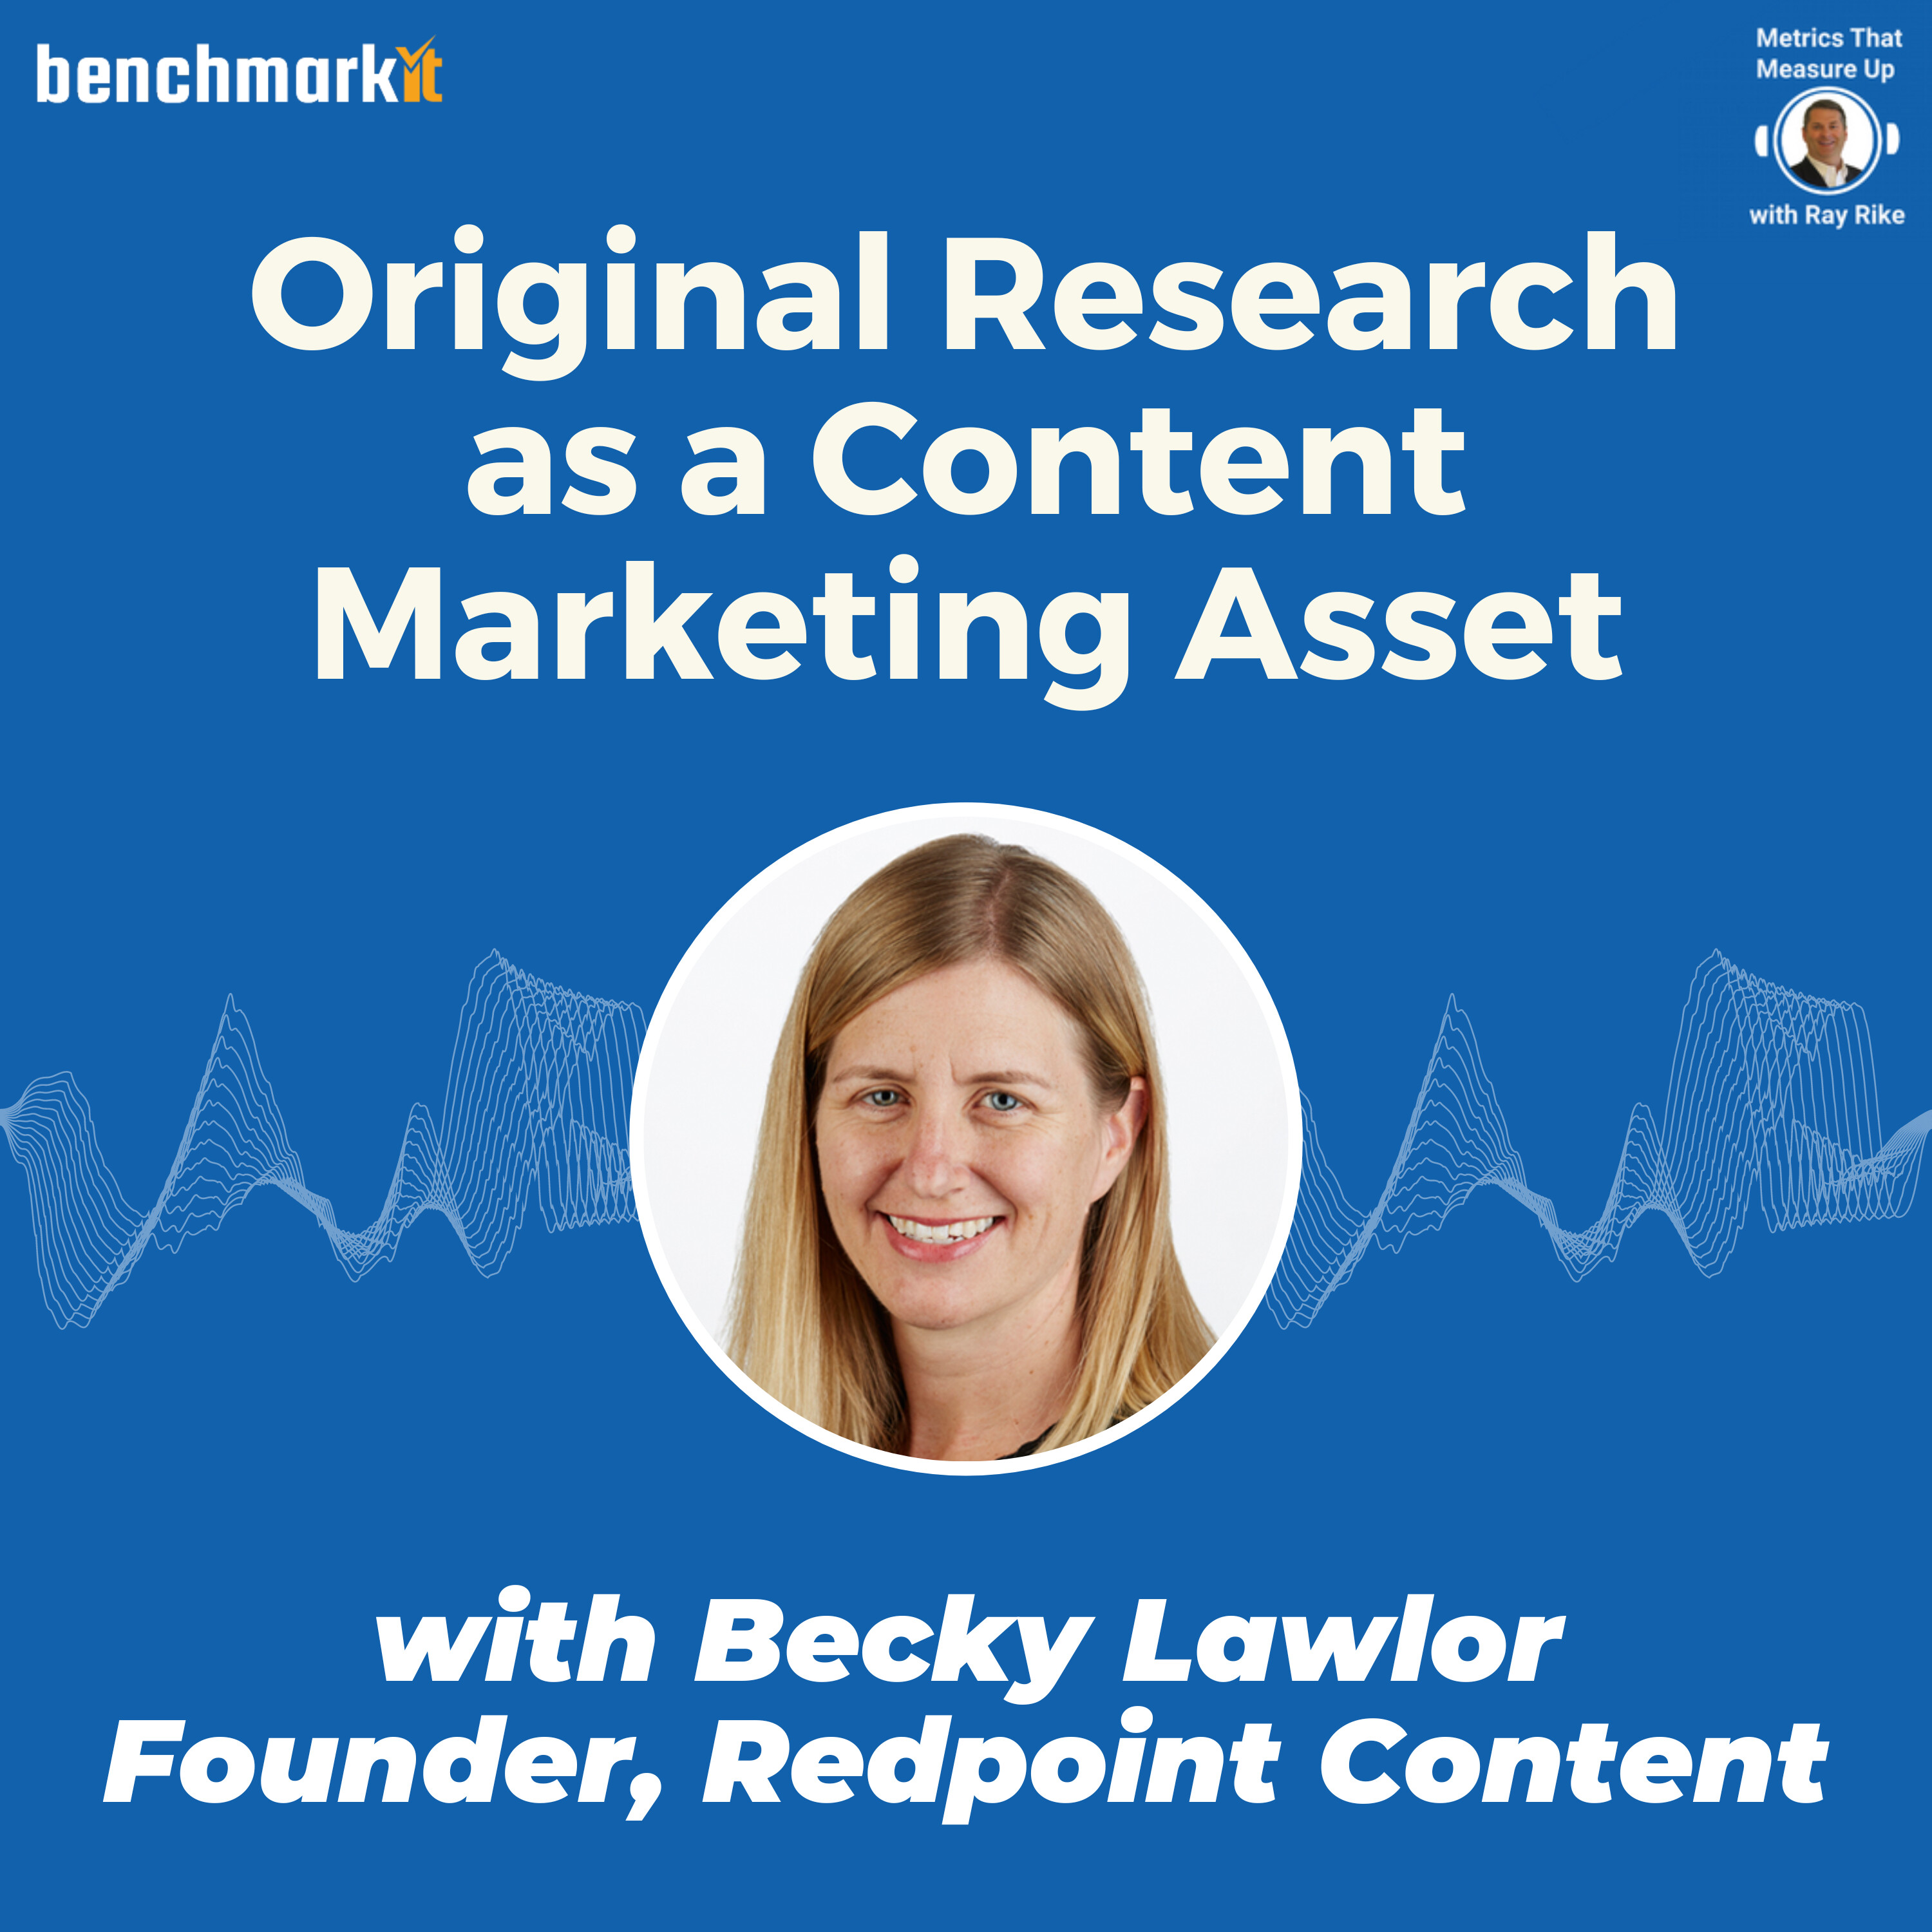 Original Research as a Content Marketing Asset - with Becky Lawlor, Redpoint Content